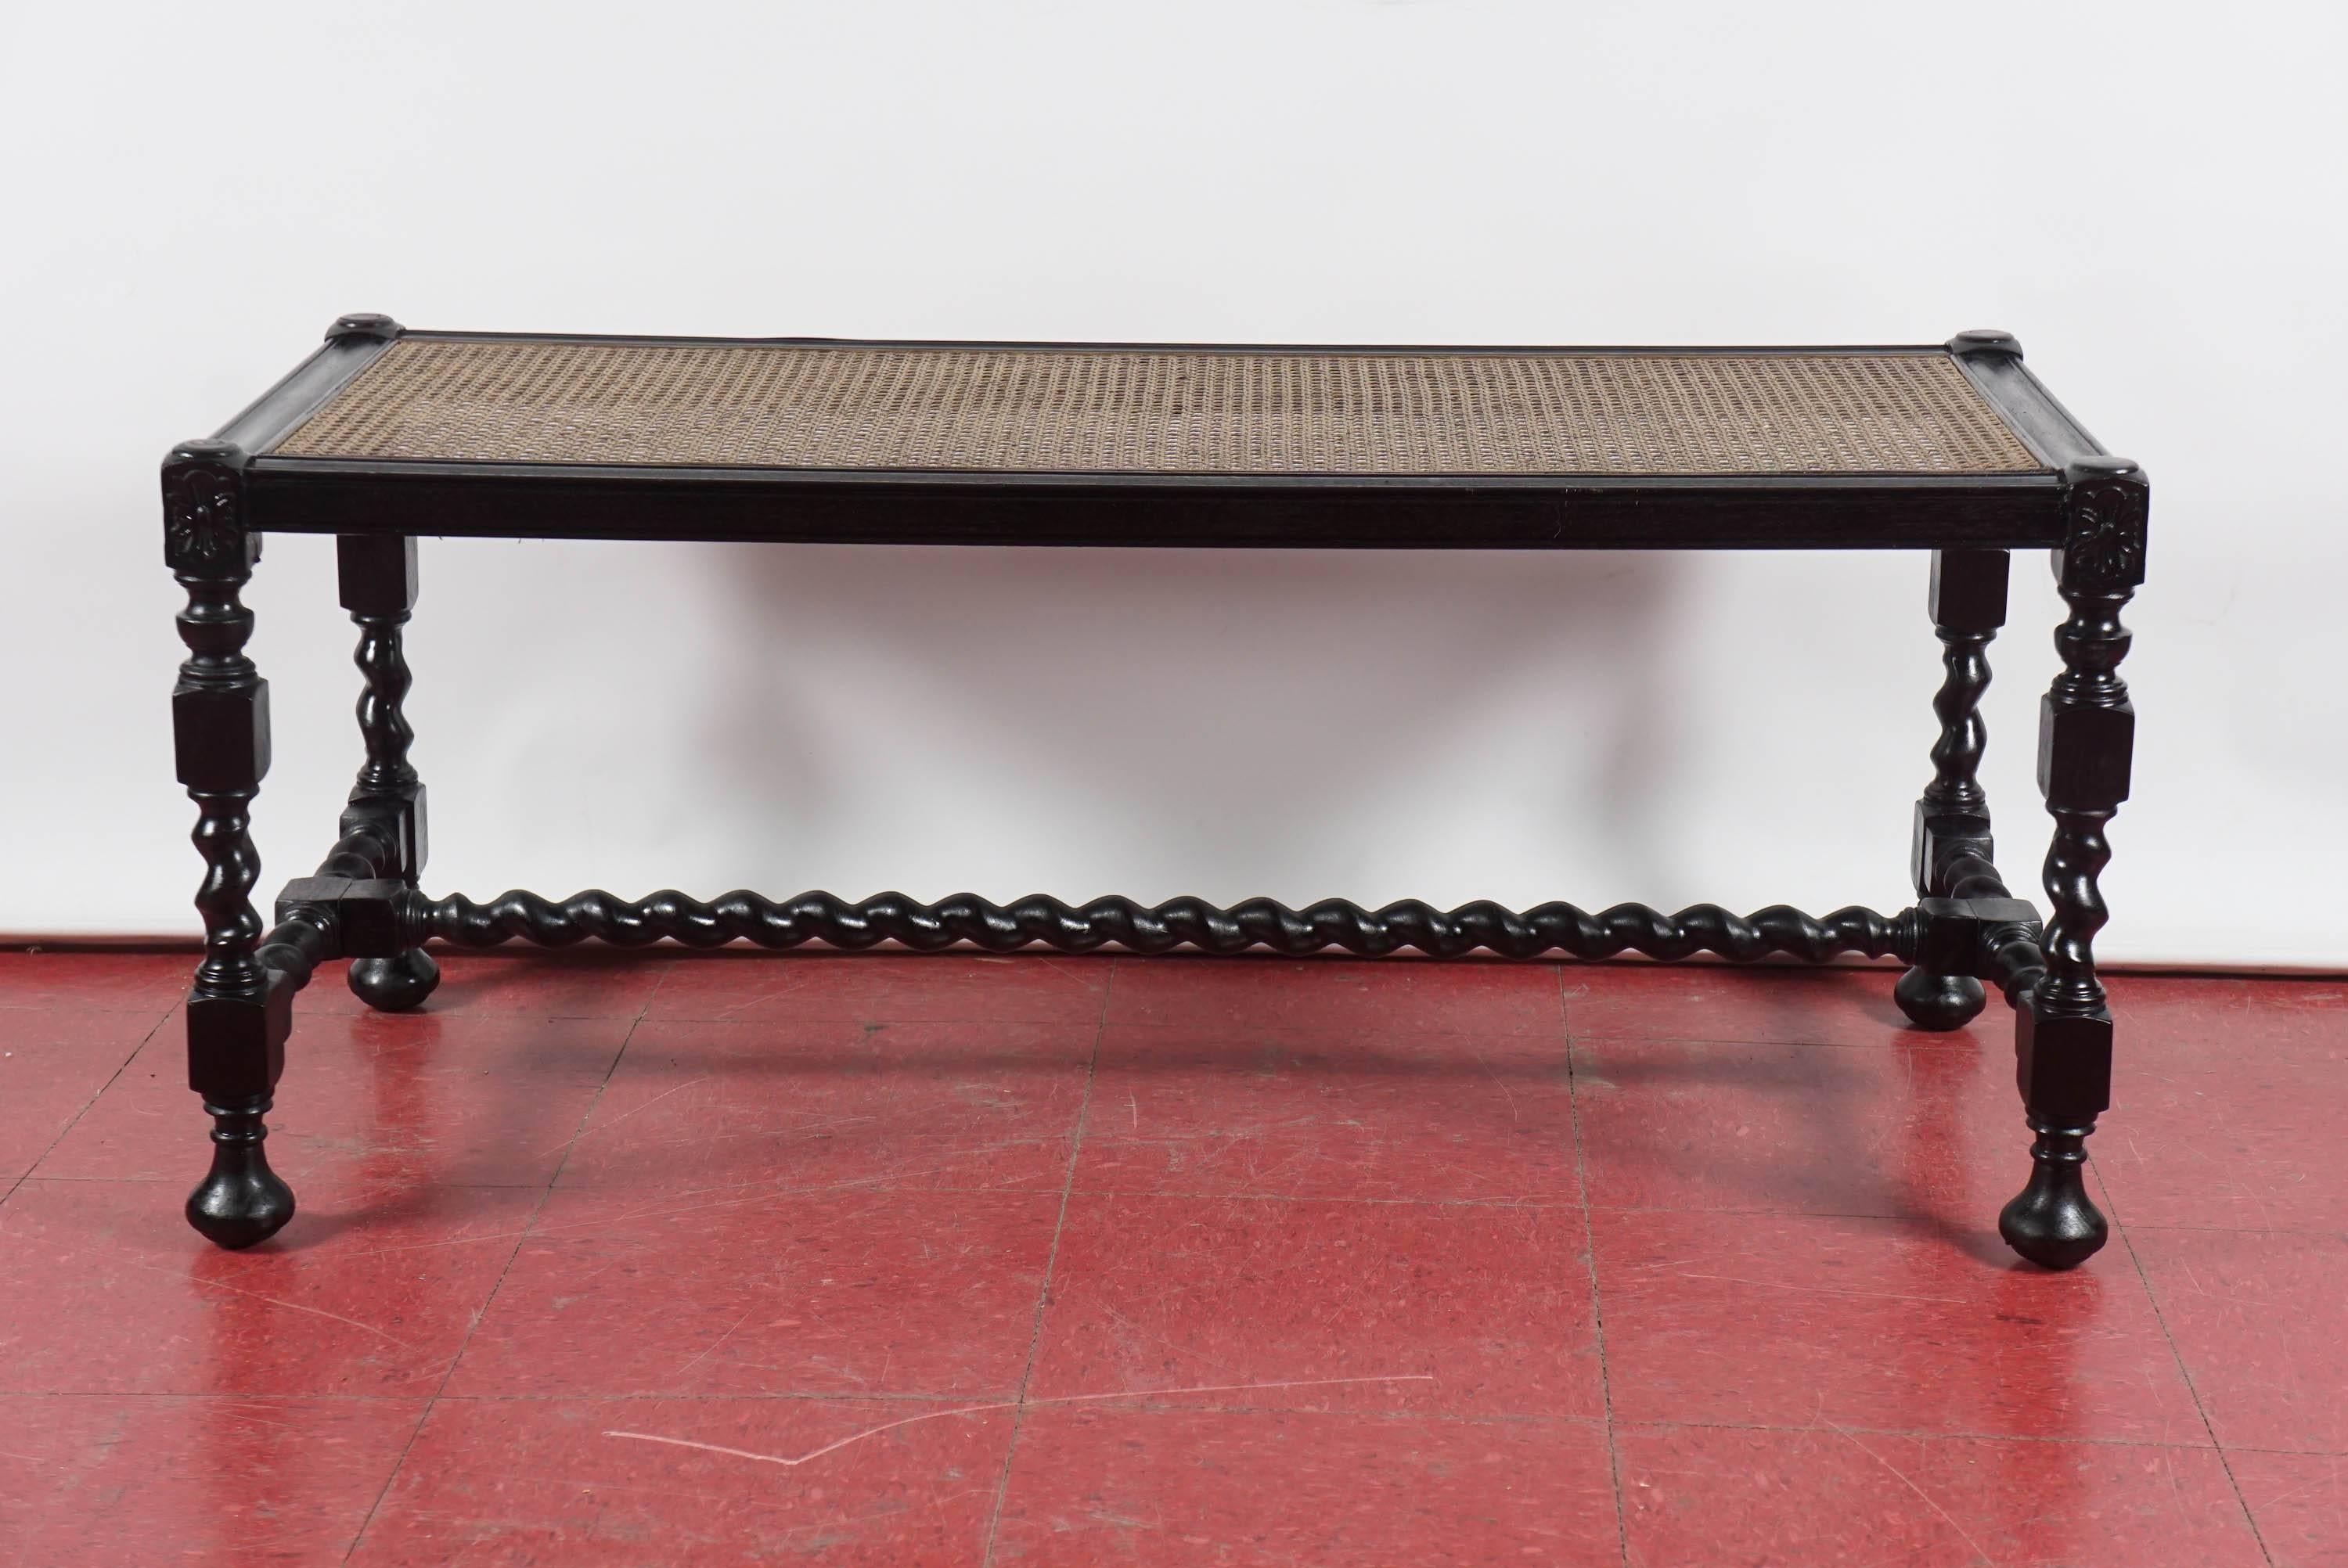 This antique English Jacobean style bench with turned legs, barley twist stretchers and has a new cane seat. Perfect for adding a cushion to be used as extra seating, at the foot of a bed or in front of a fireplace.